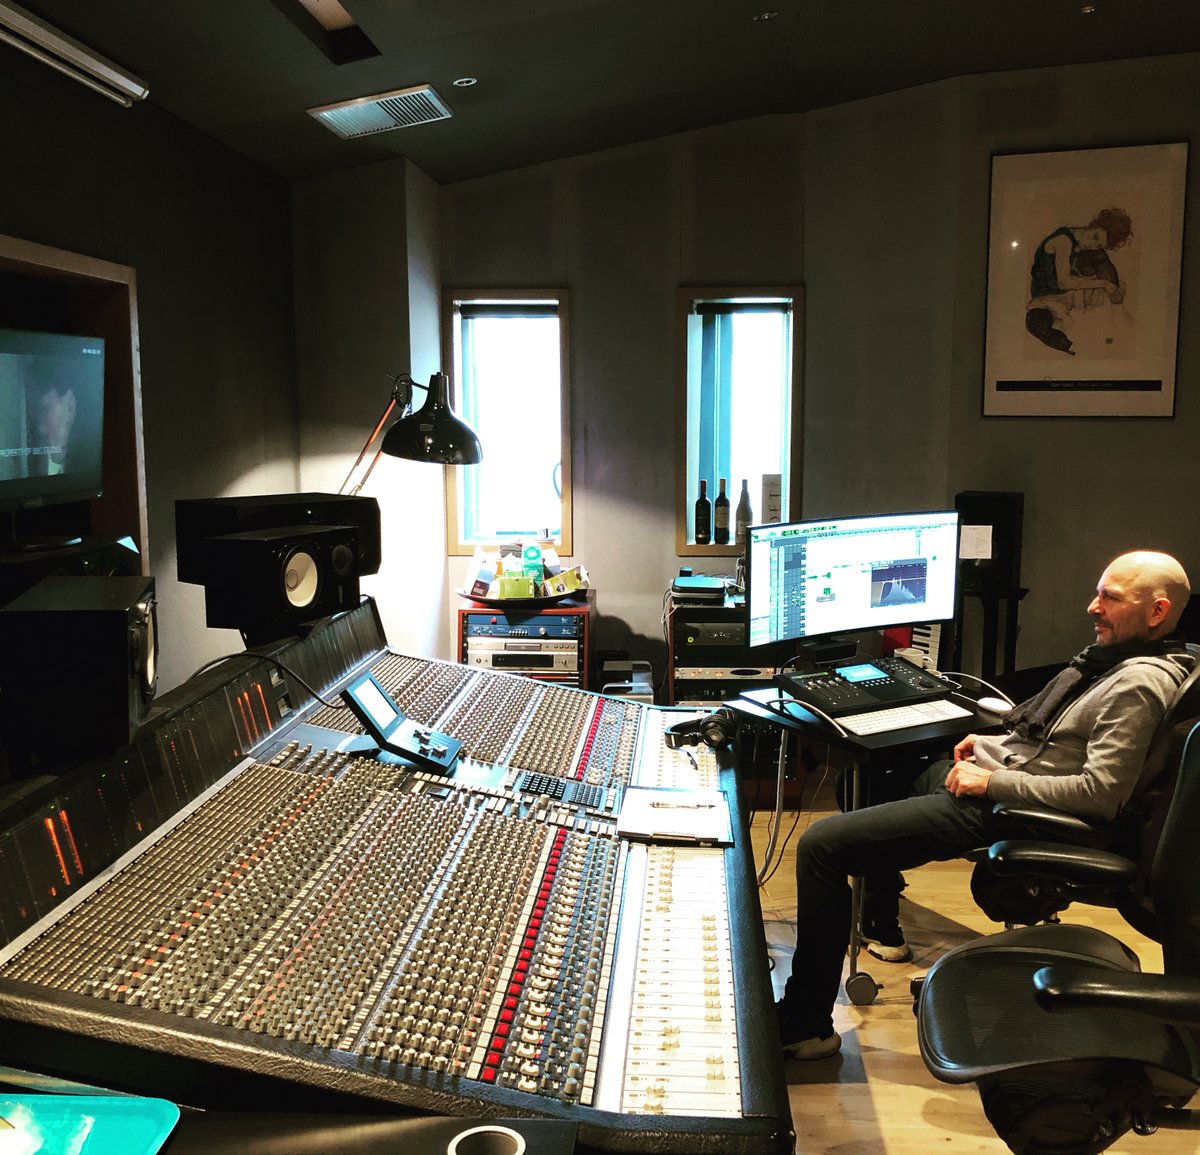 21) I first met Goetz ( @GoetzB1) when we both worked on Martin Phipps's score for the film X+Y in 2014. Goetz is an amazing engineer & apart from THE FEED he's also mixed my scores for THIRTEEN & WE HUNT TOGETHER. He did a brilliant surround mix of the score for THE FEED.